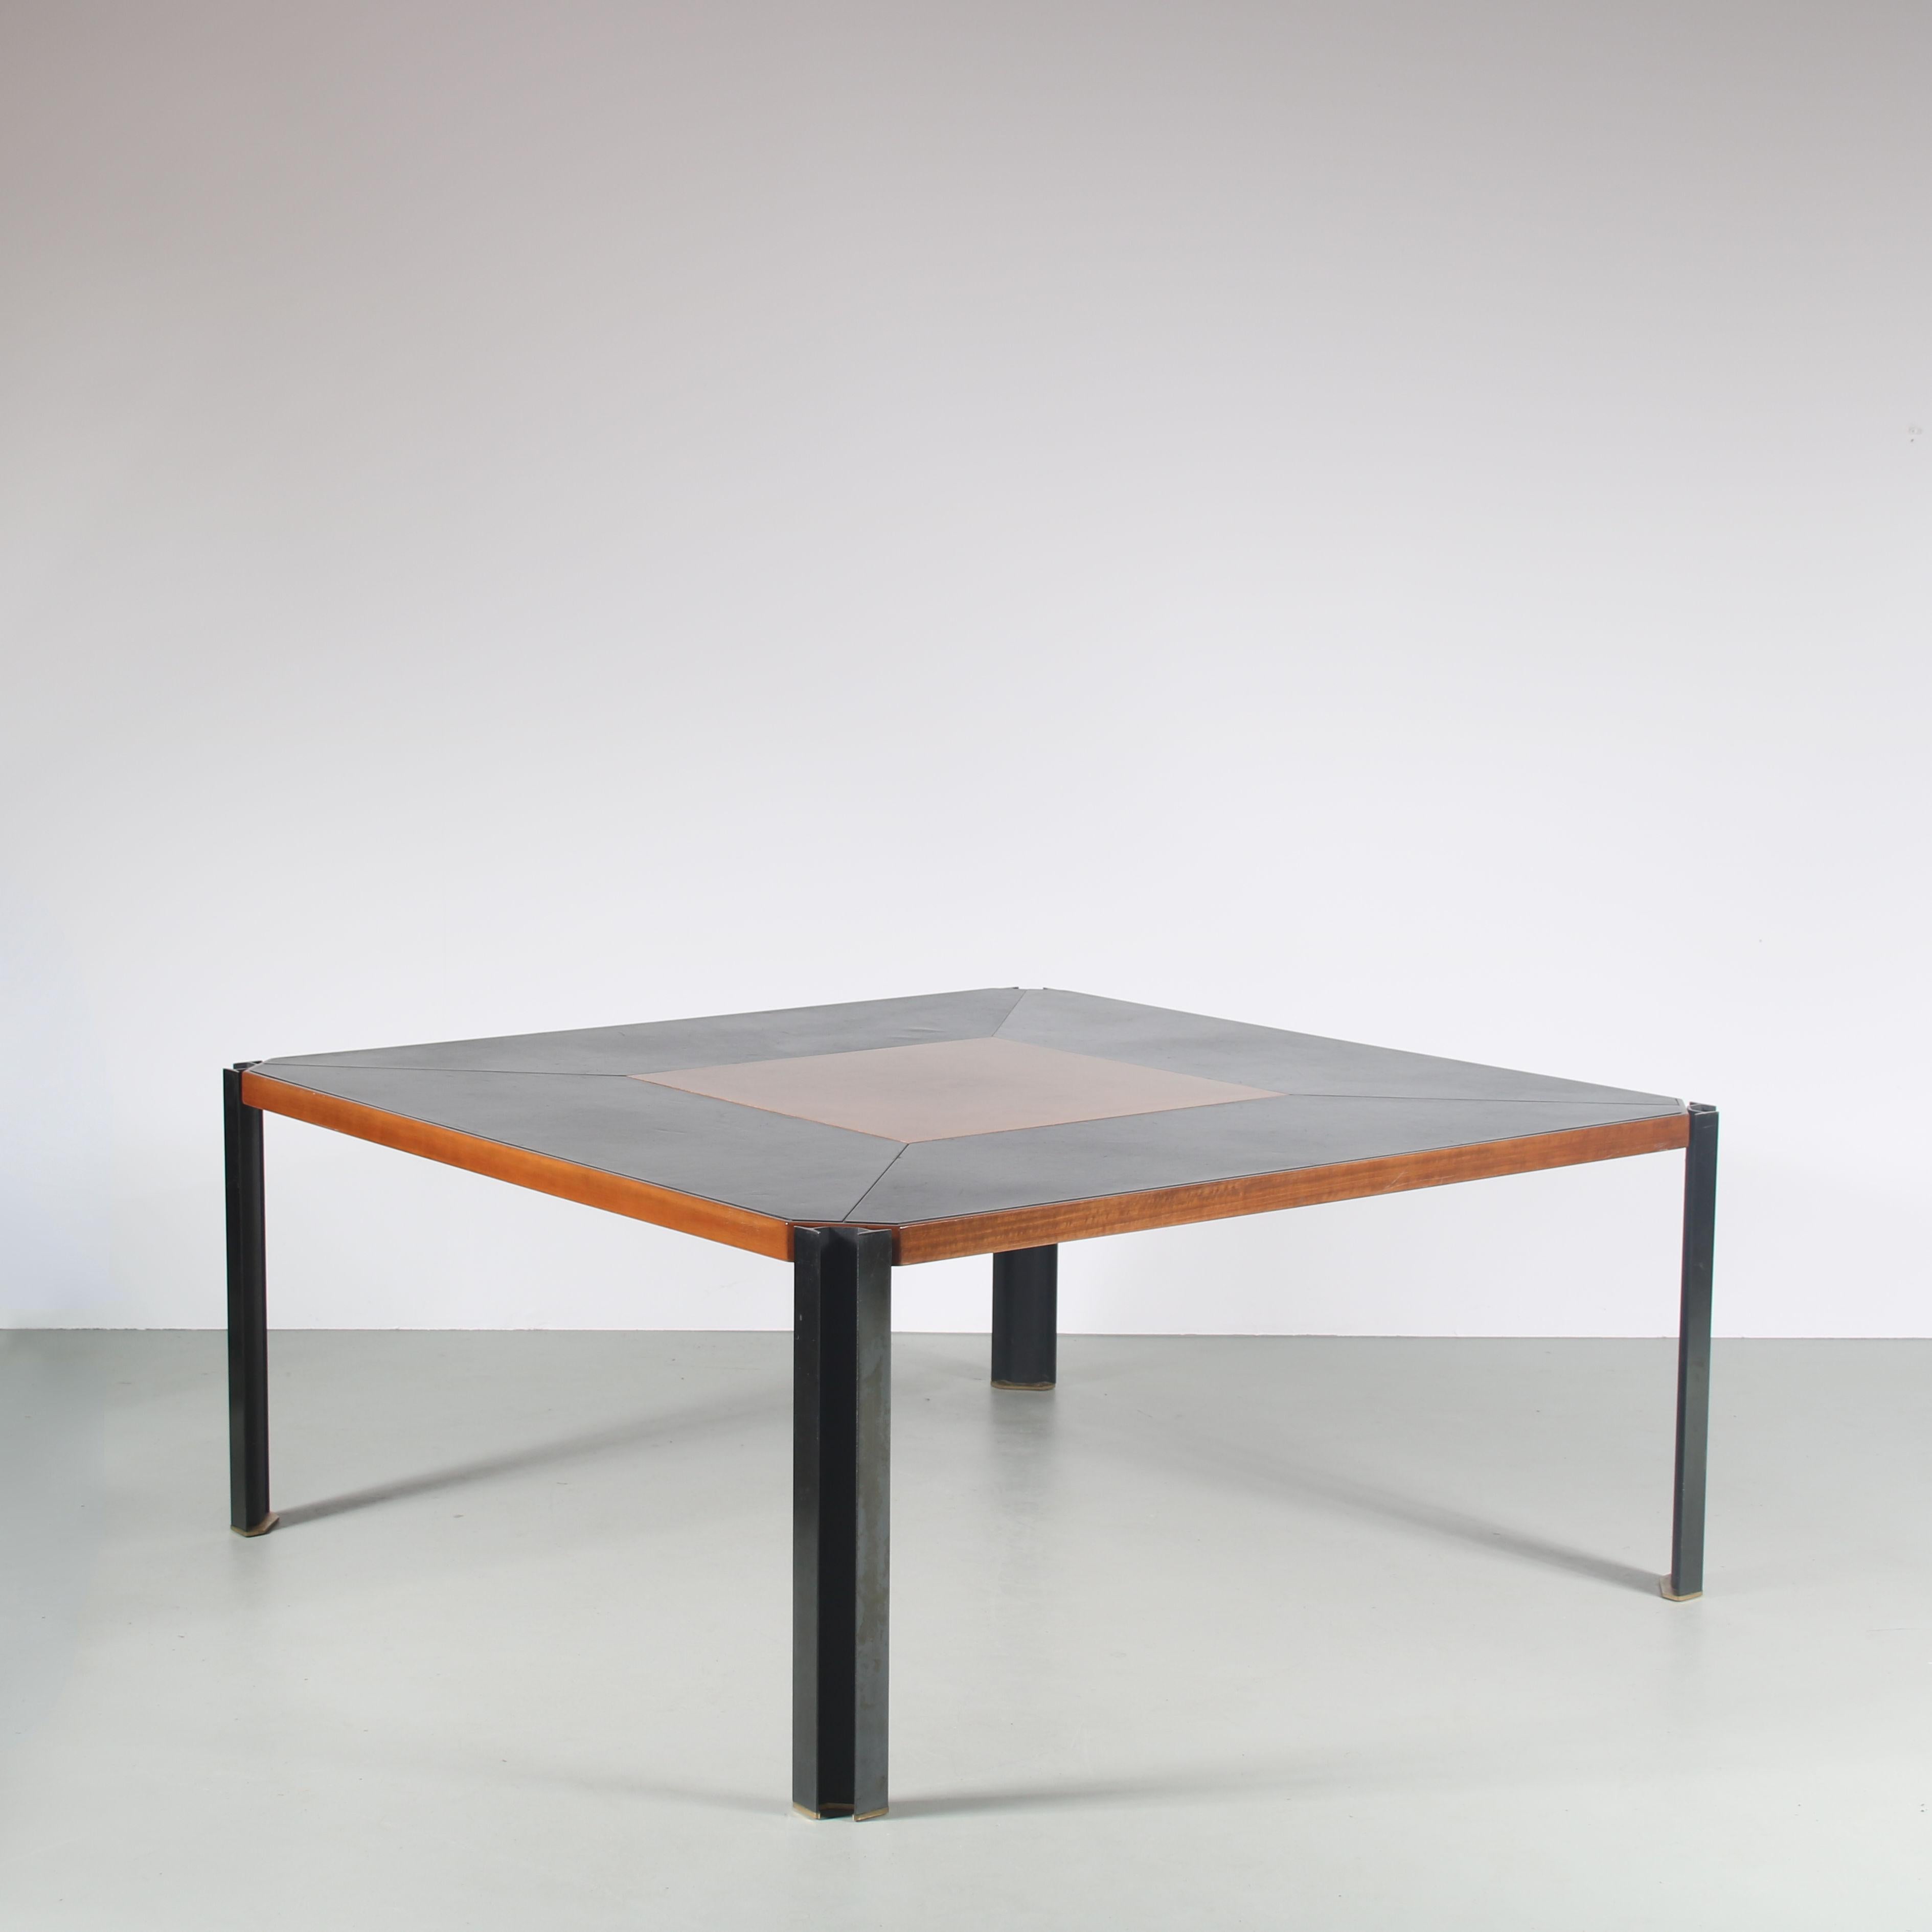 

A beautiful dining table, model “T210”, designed by Osvaldo Borsani and manufactured by Tecno Milano in Italy around 1950.

This eye-catching table rests on black cast iron legs and is made of warm brown hardwood with a leather inlay to the top.